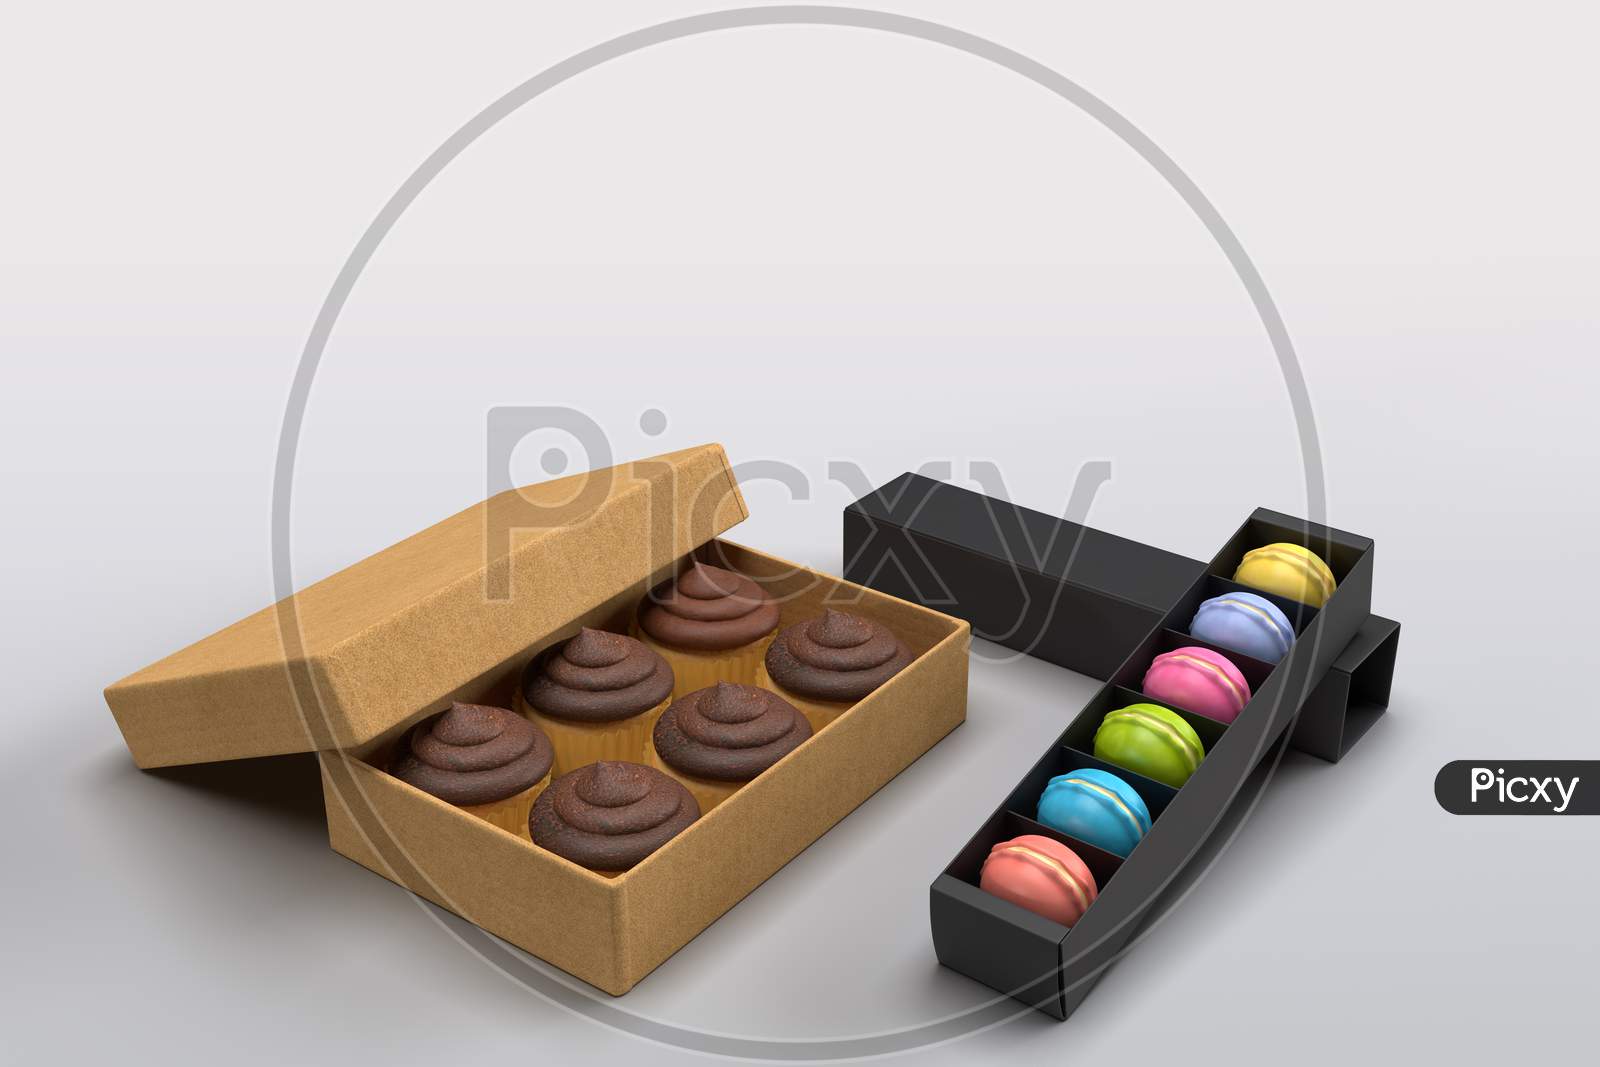 A Box Full Of Cupcakes And Macaroons Box With Blank Mockups Isolated In White Background. Fast Food Lifestyle Concept, 3D Rendering